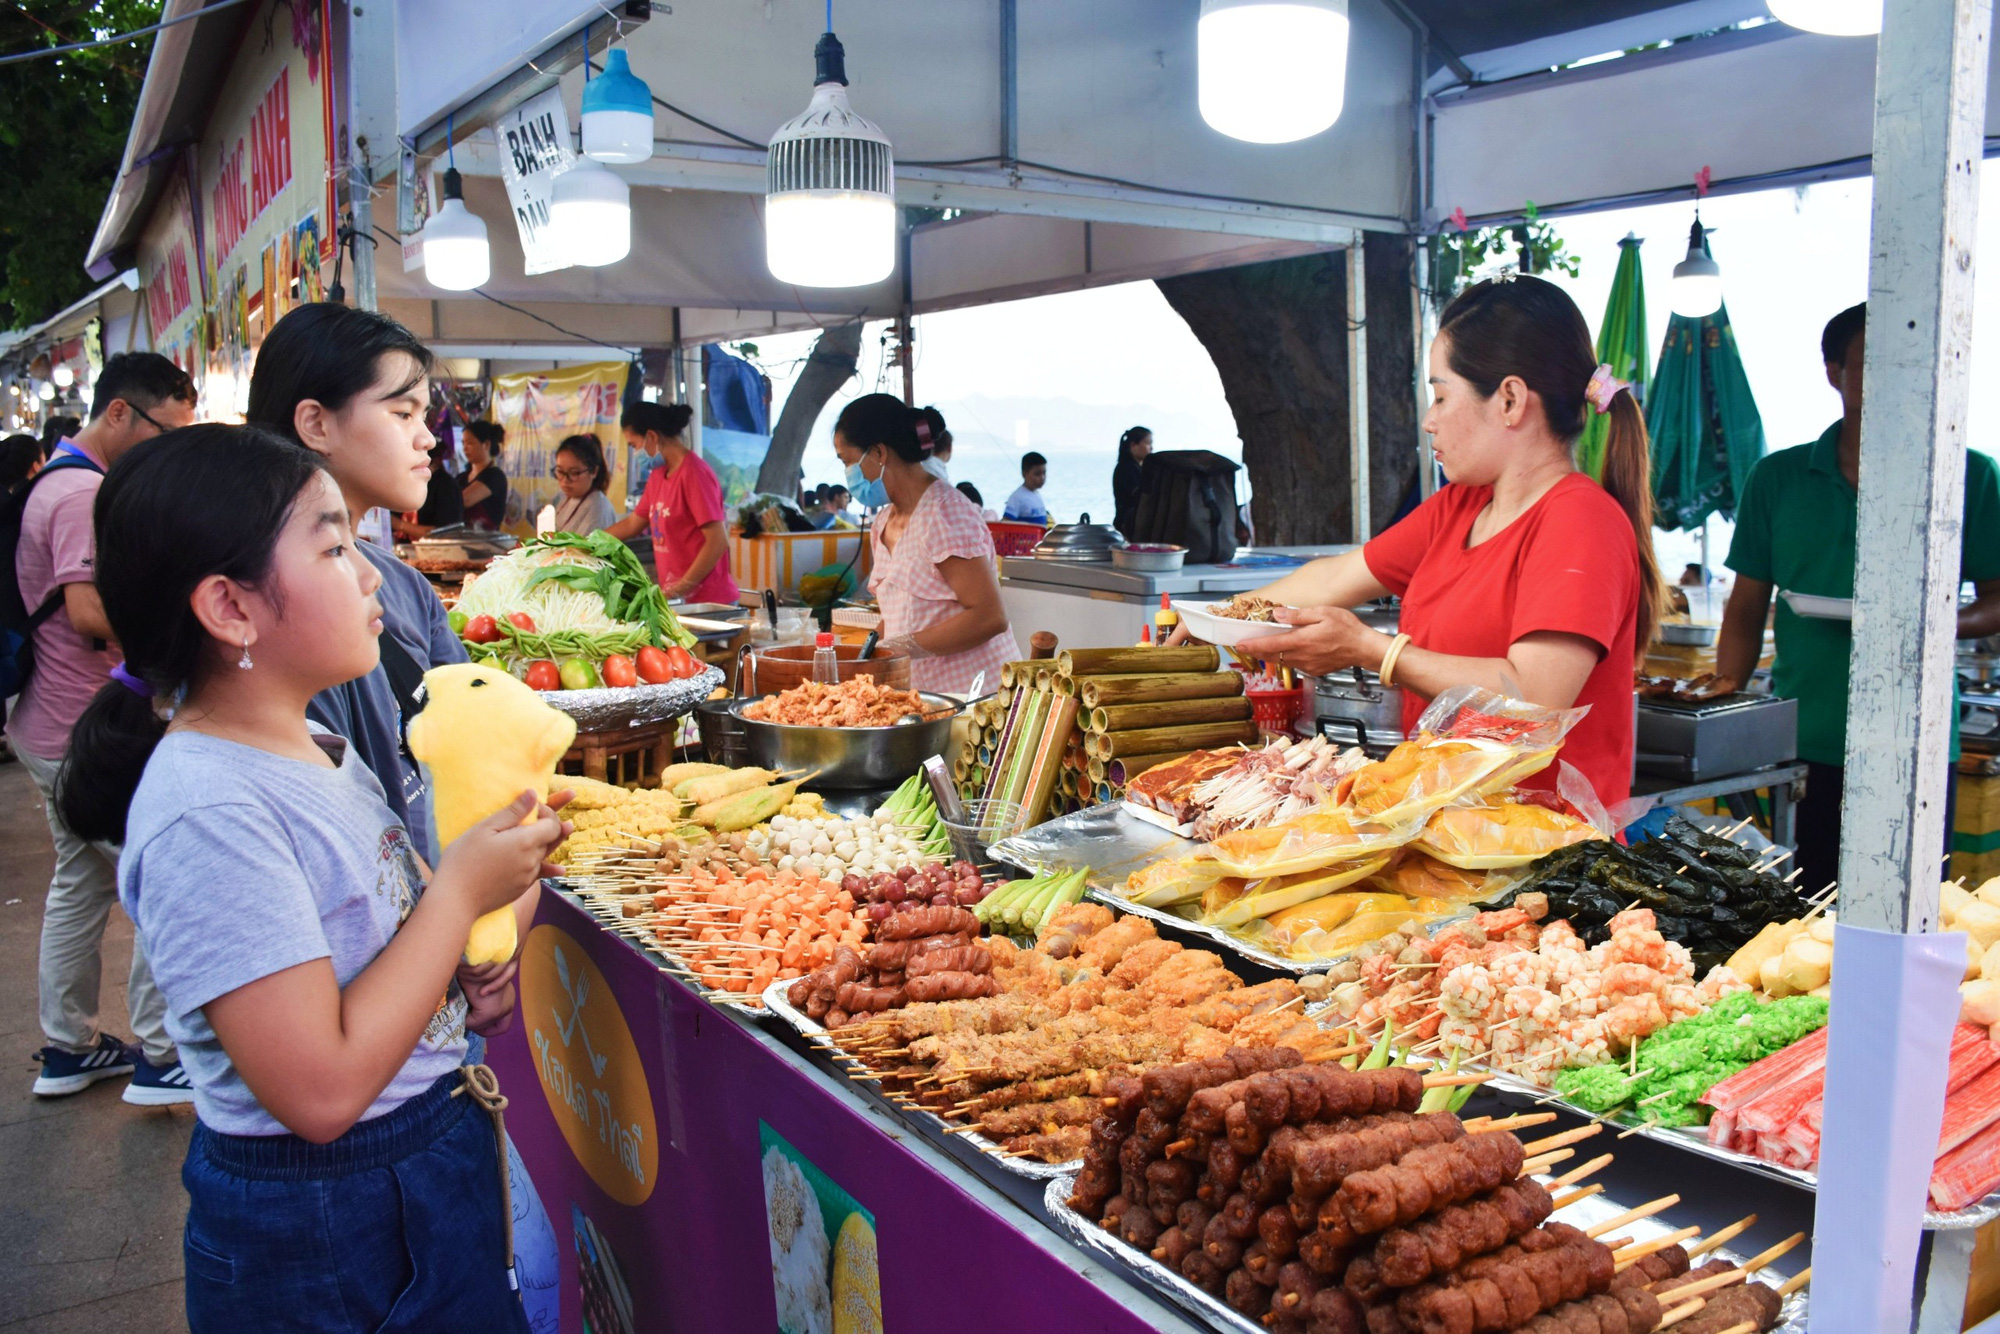 Feast on Vietnamese culinary delights at Nha Trang food fest